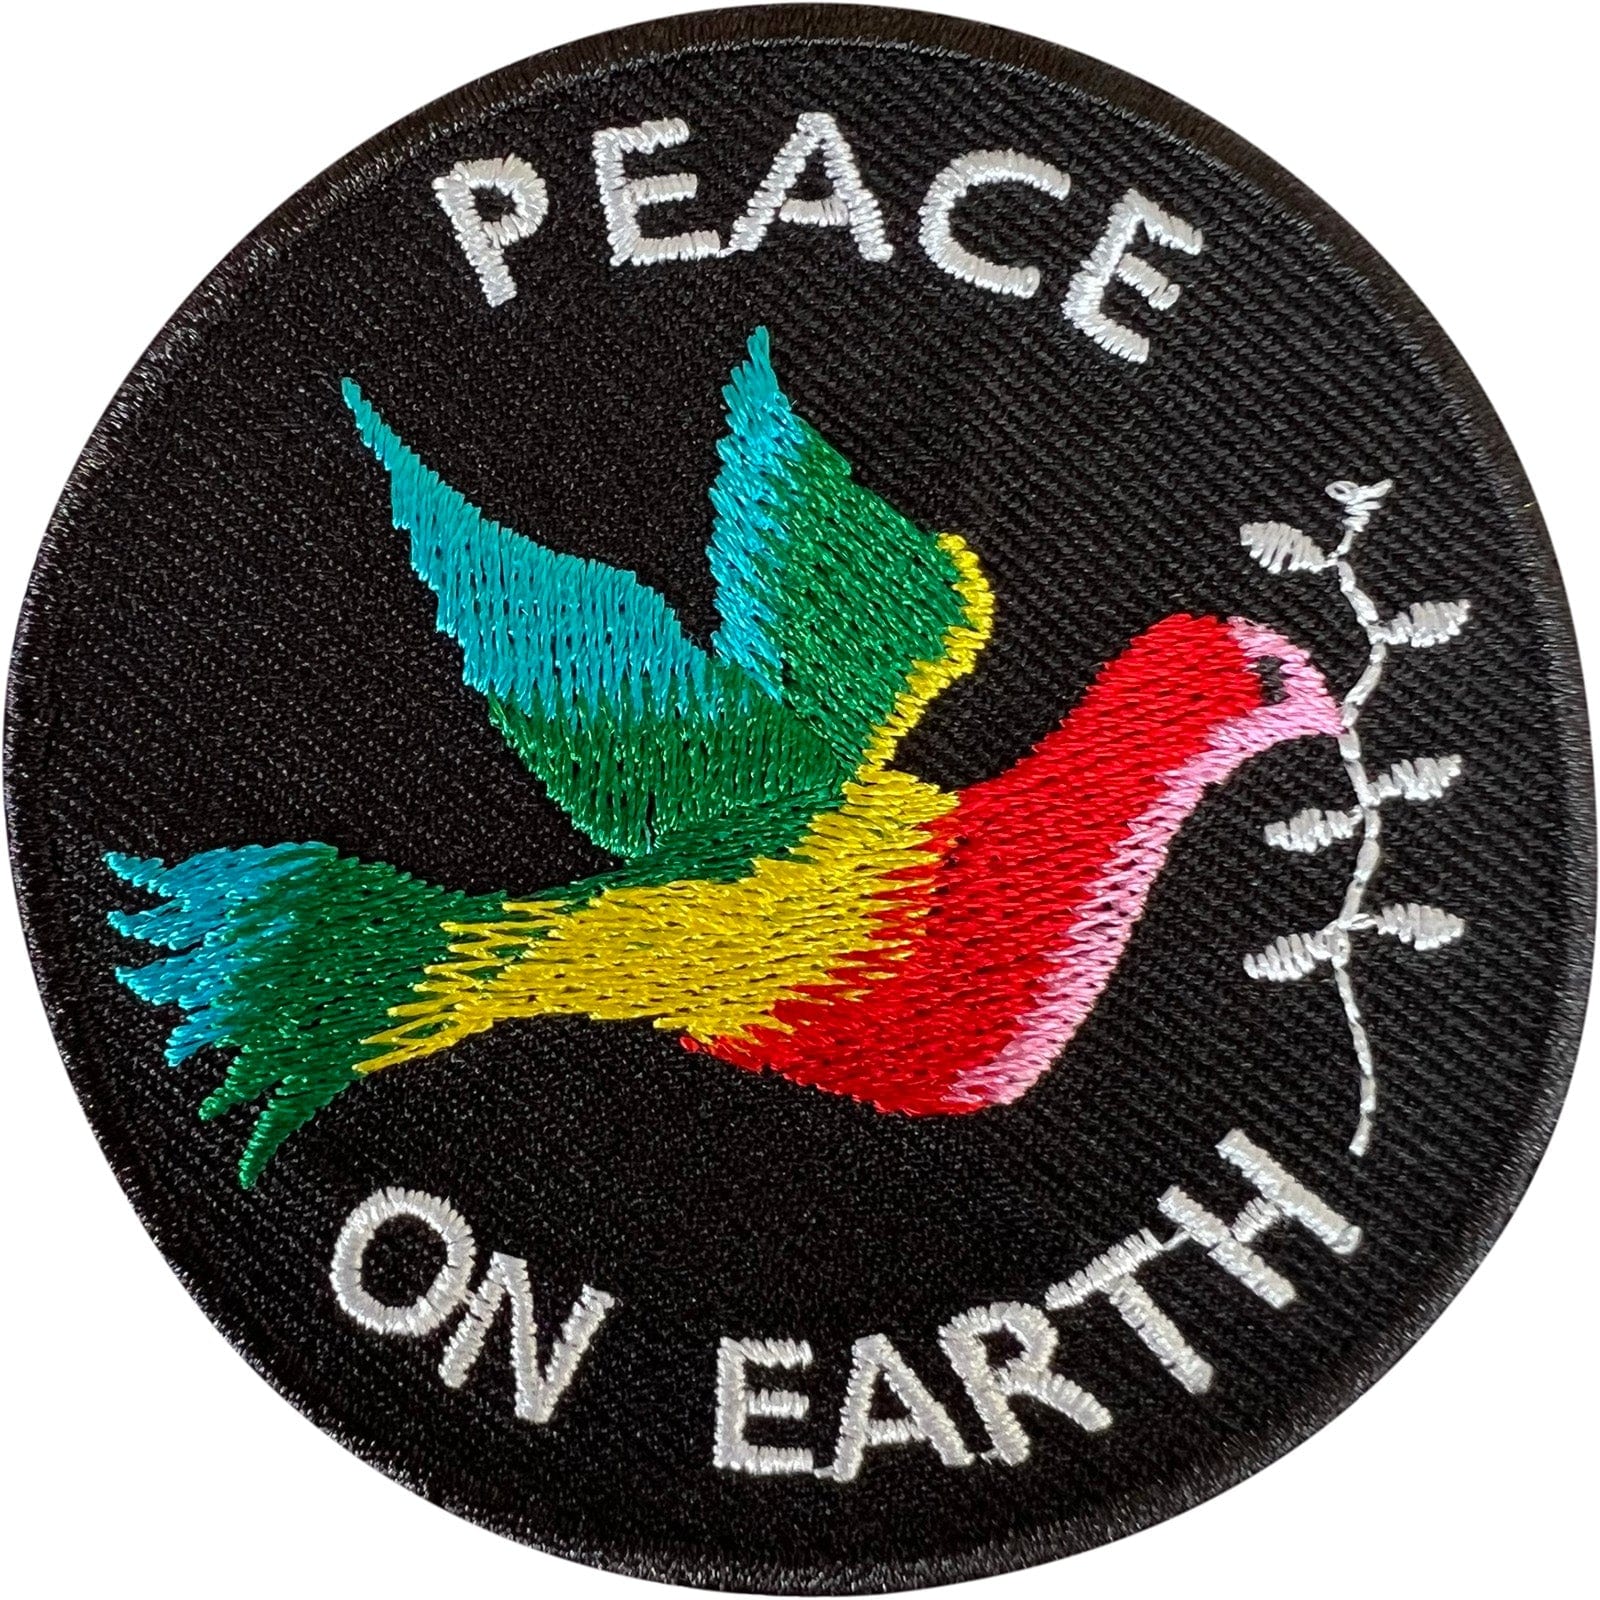 Rainbow Dove Peace on Earth Patch Iron Sew On Clothes Bag Bird Embroidered Badge